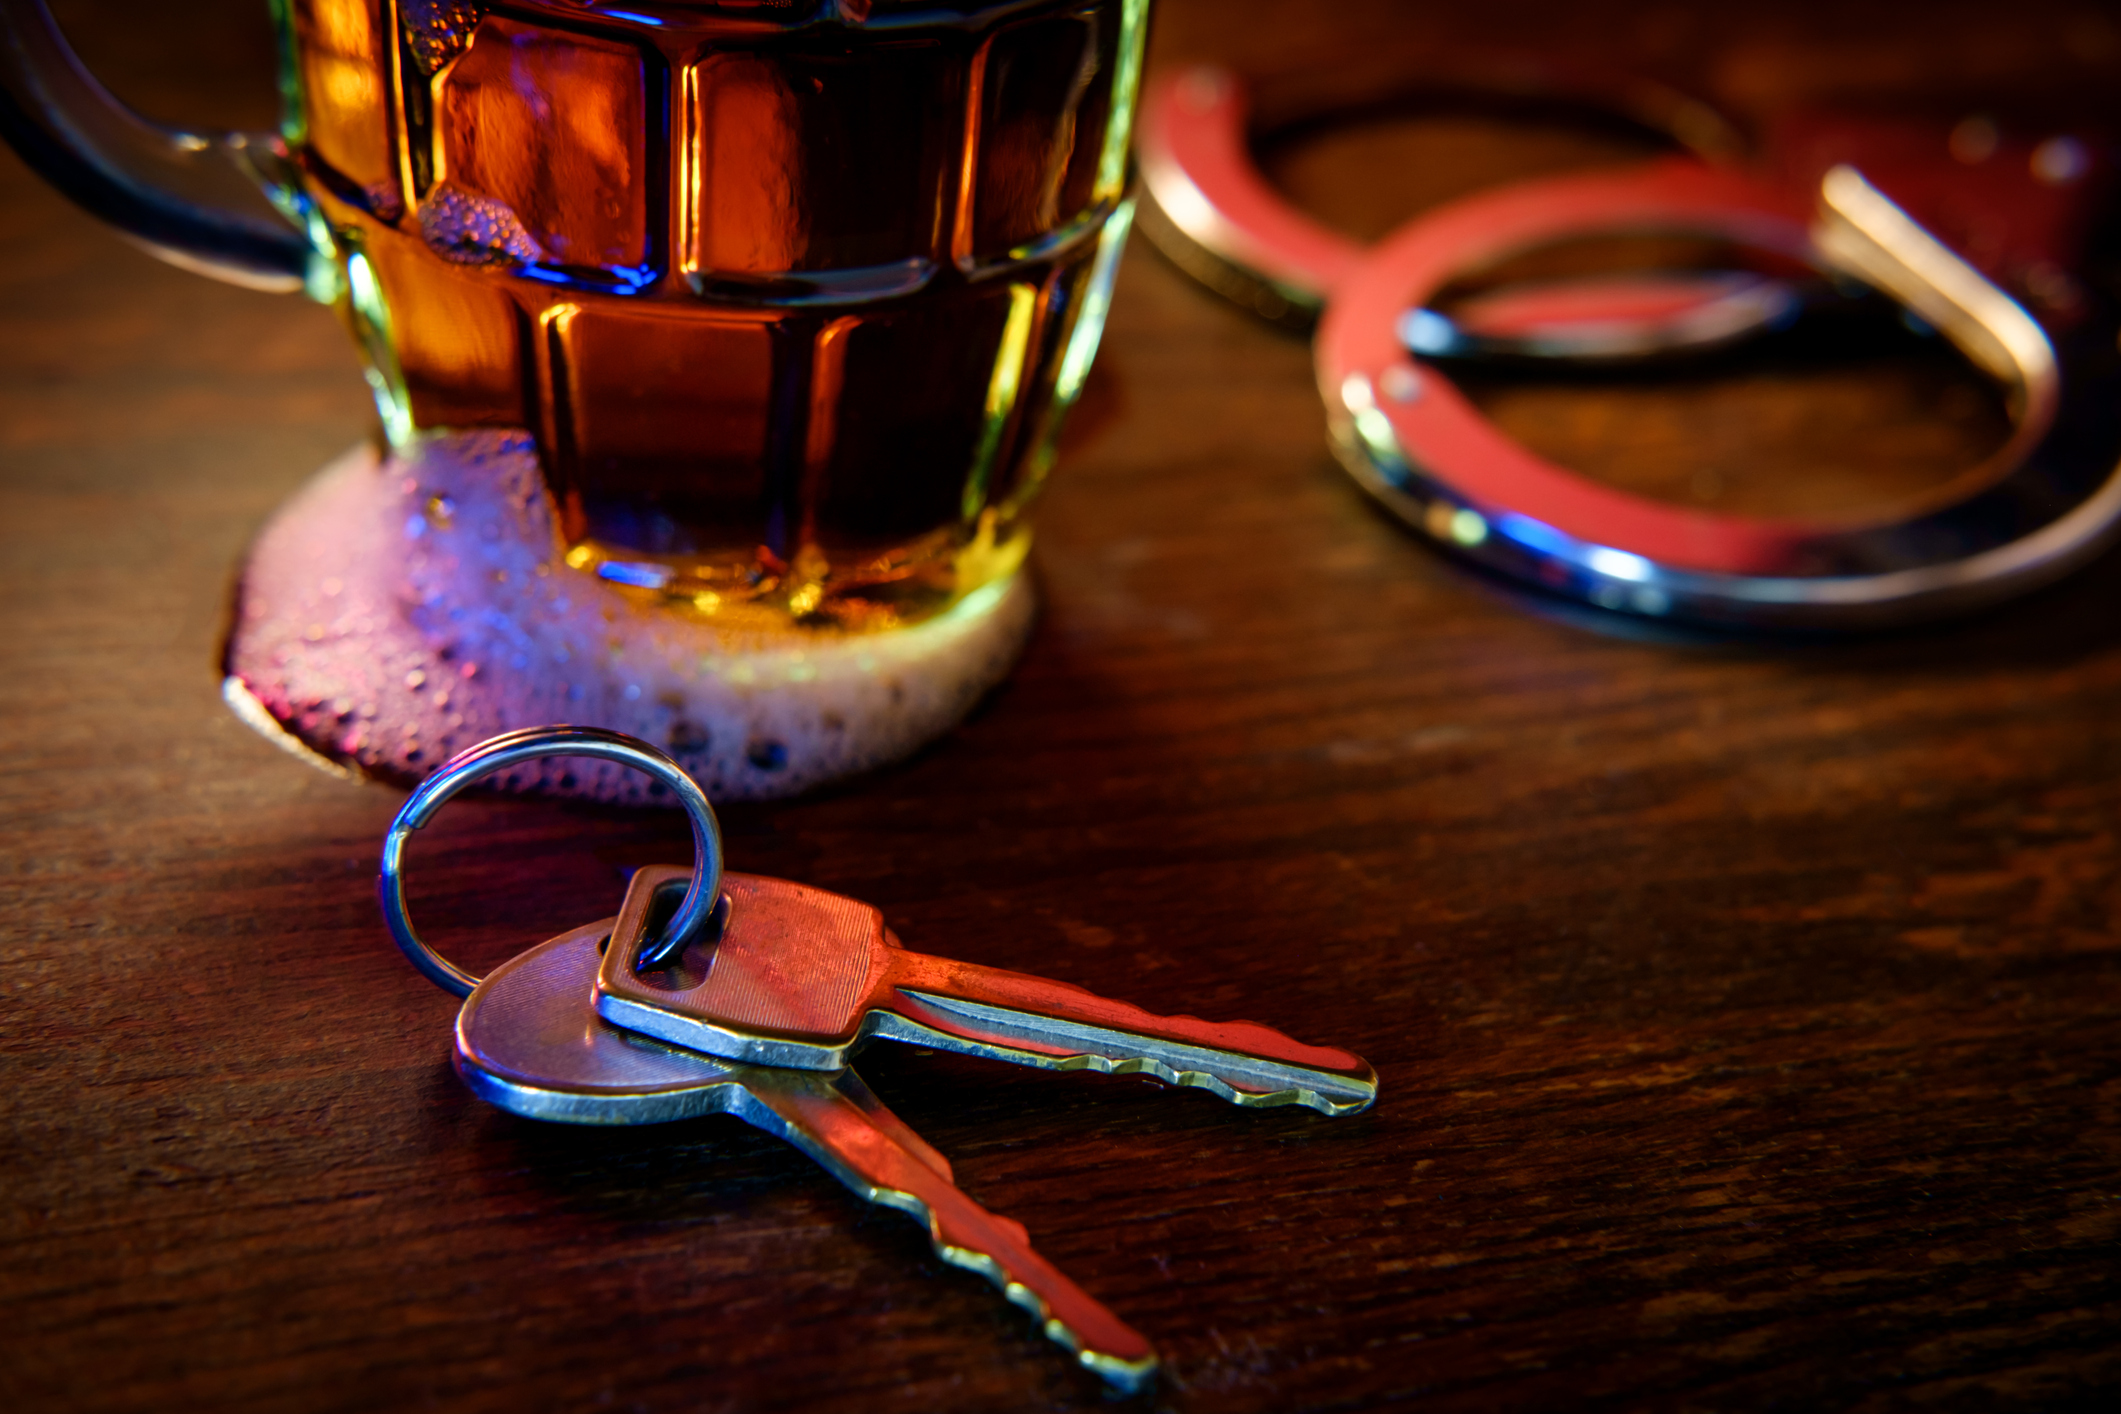 Mug of frothy beer with car keys - recipe for a DUI arrest